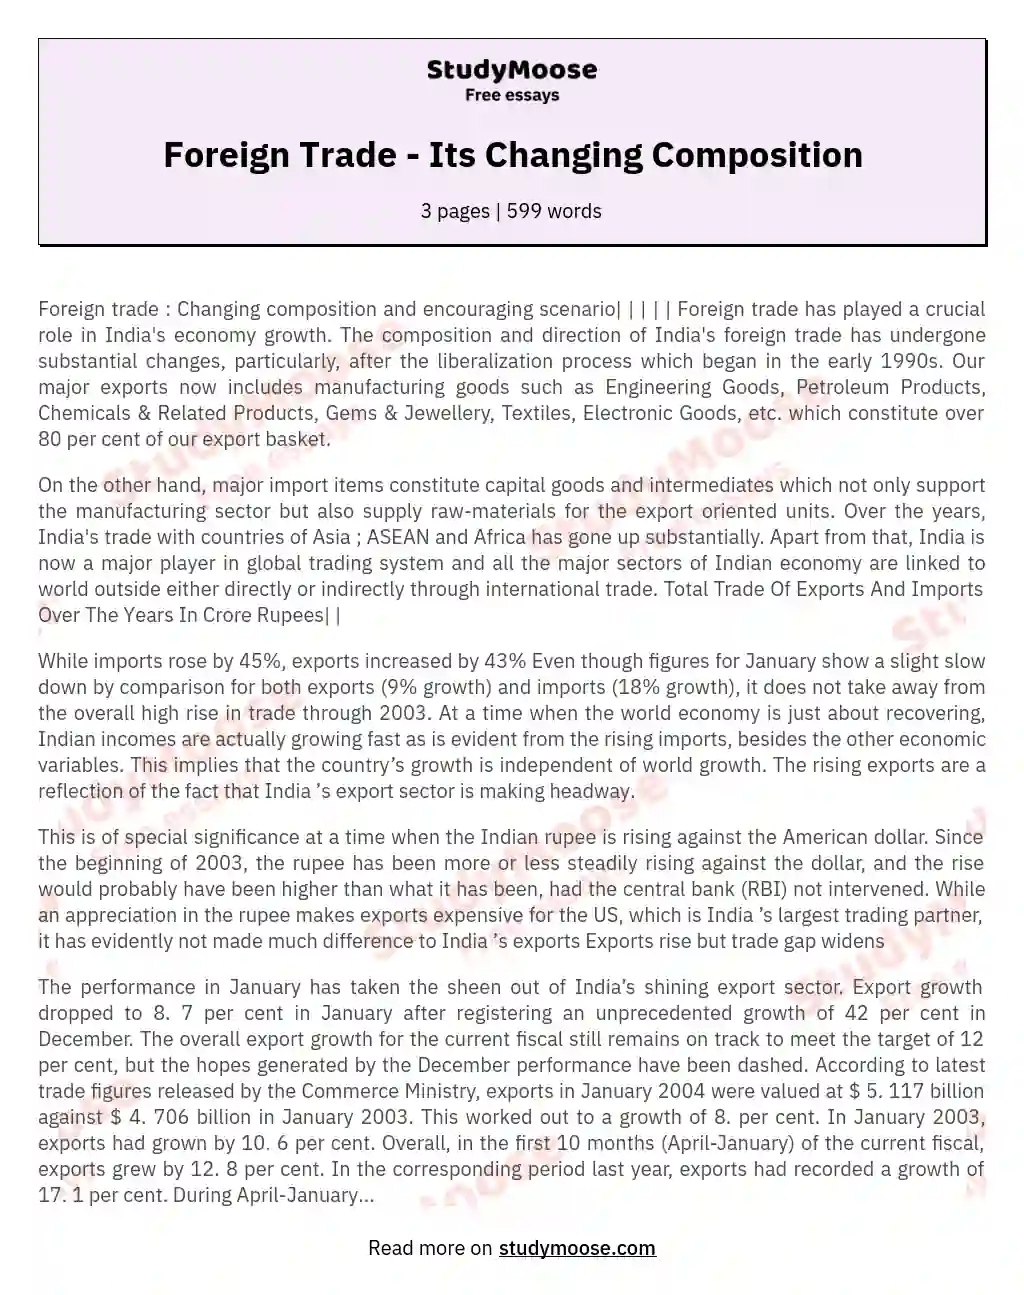 Foreign Trade - Its Changing Composition